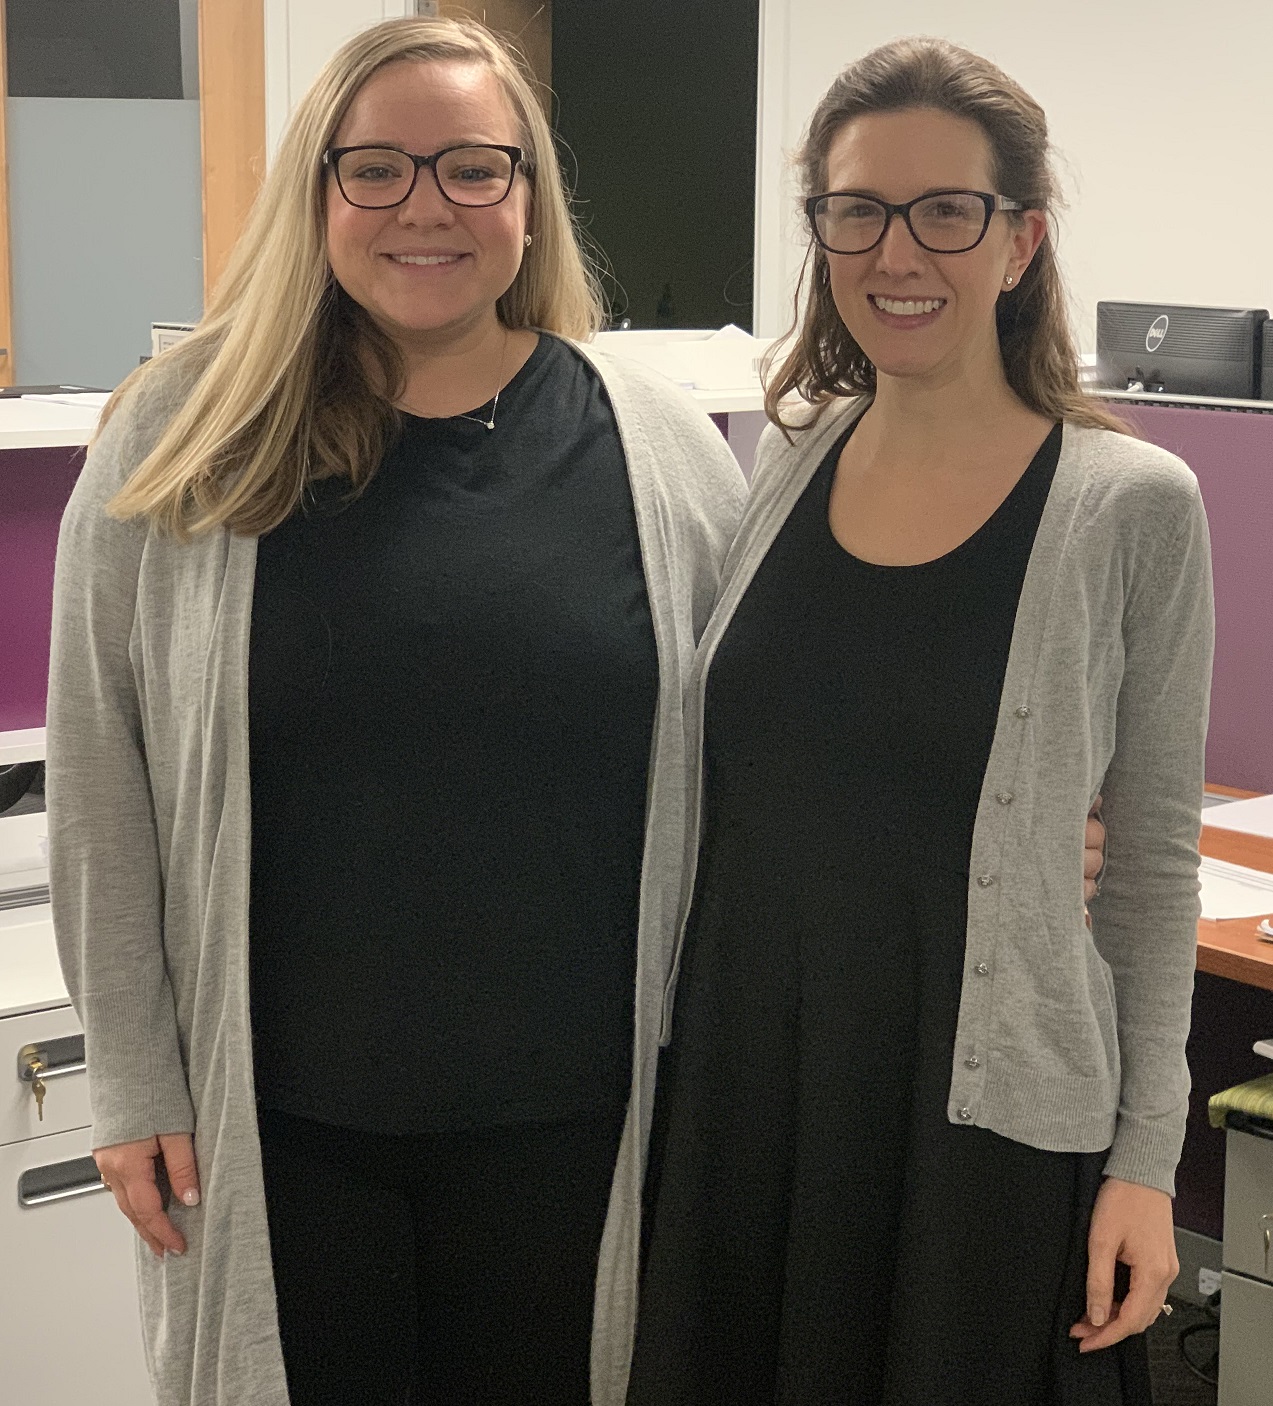 Megan and Autumn: accidental twins for a day